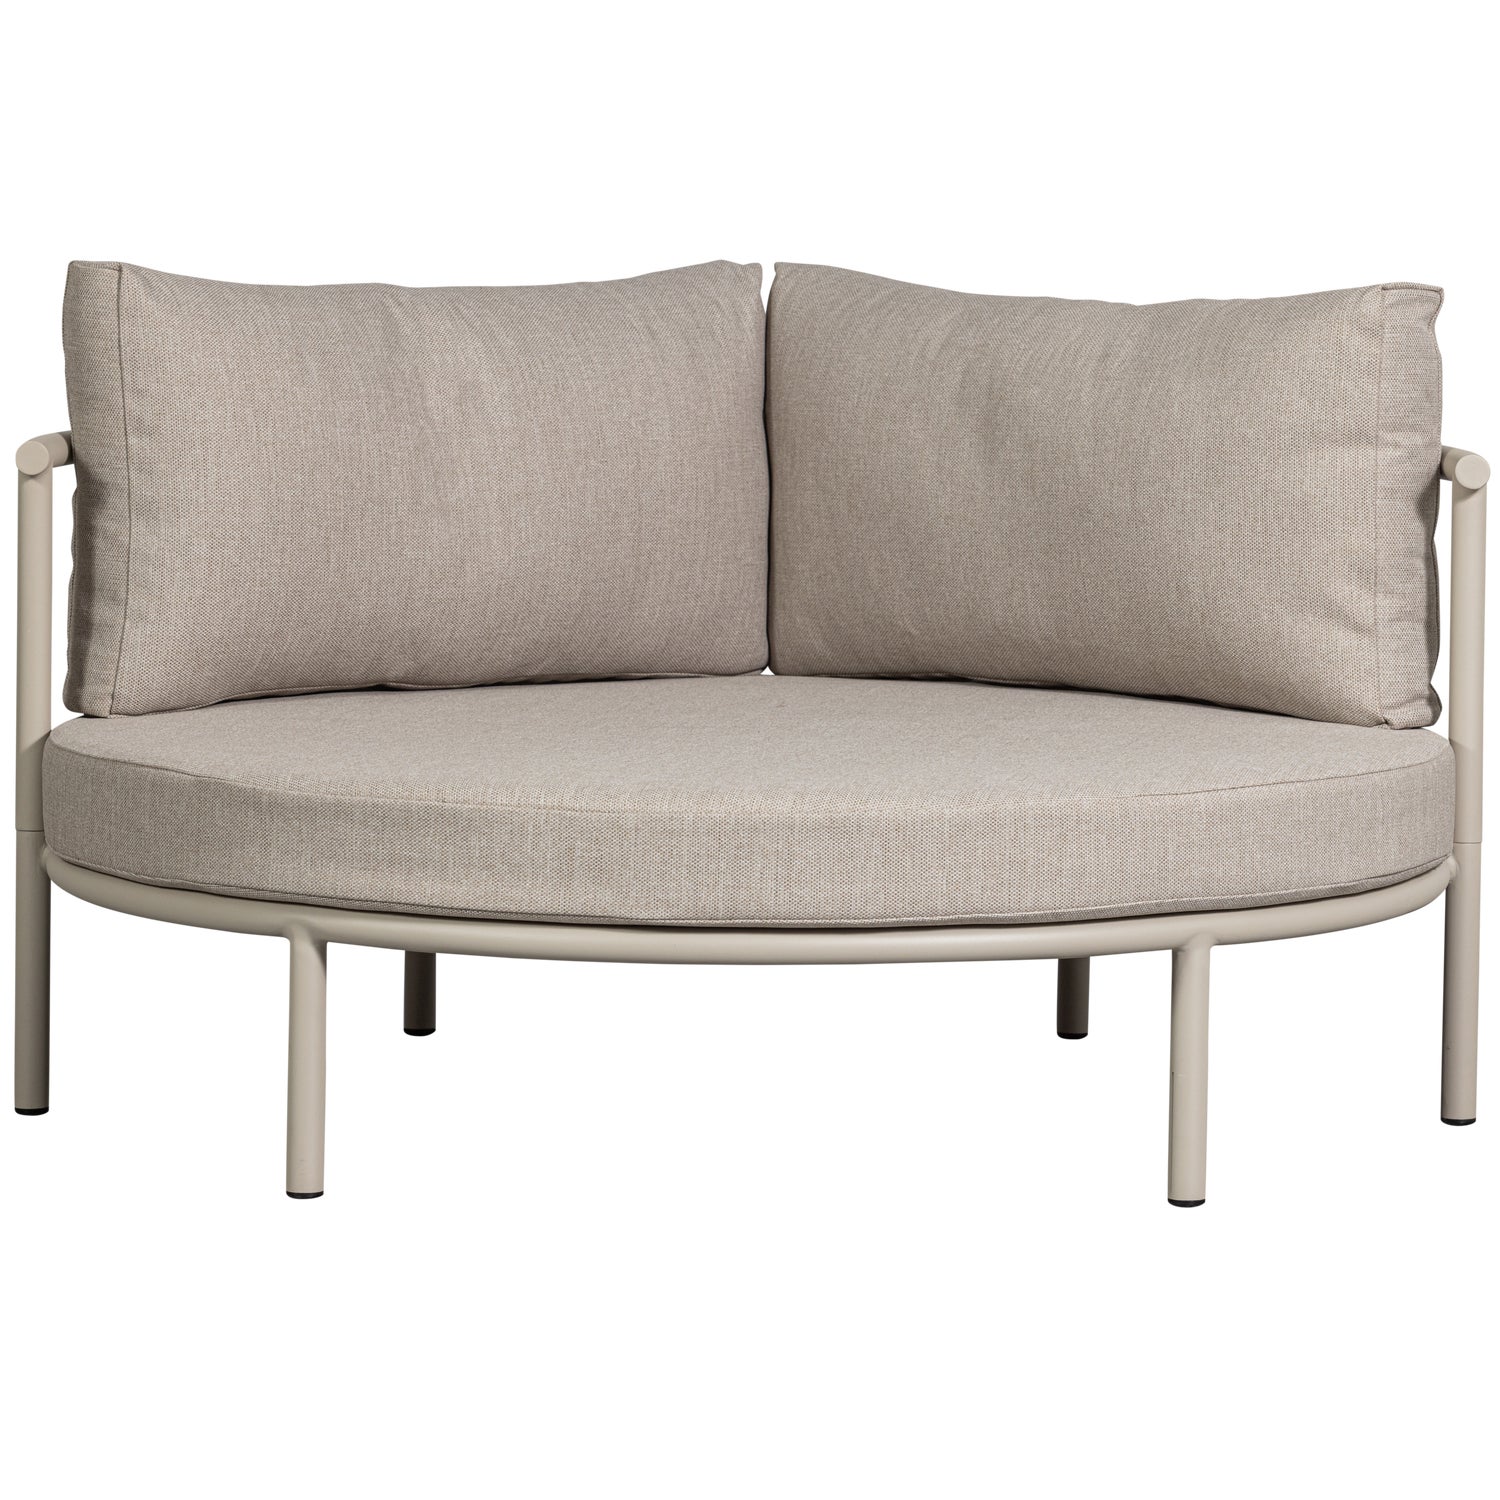 500015-Z-01_VS_EXT_Mulberry_rond_loungebed_aluminium_zand.png?auto=webp&format=png&width=1500&height=1500